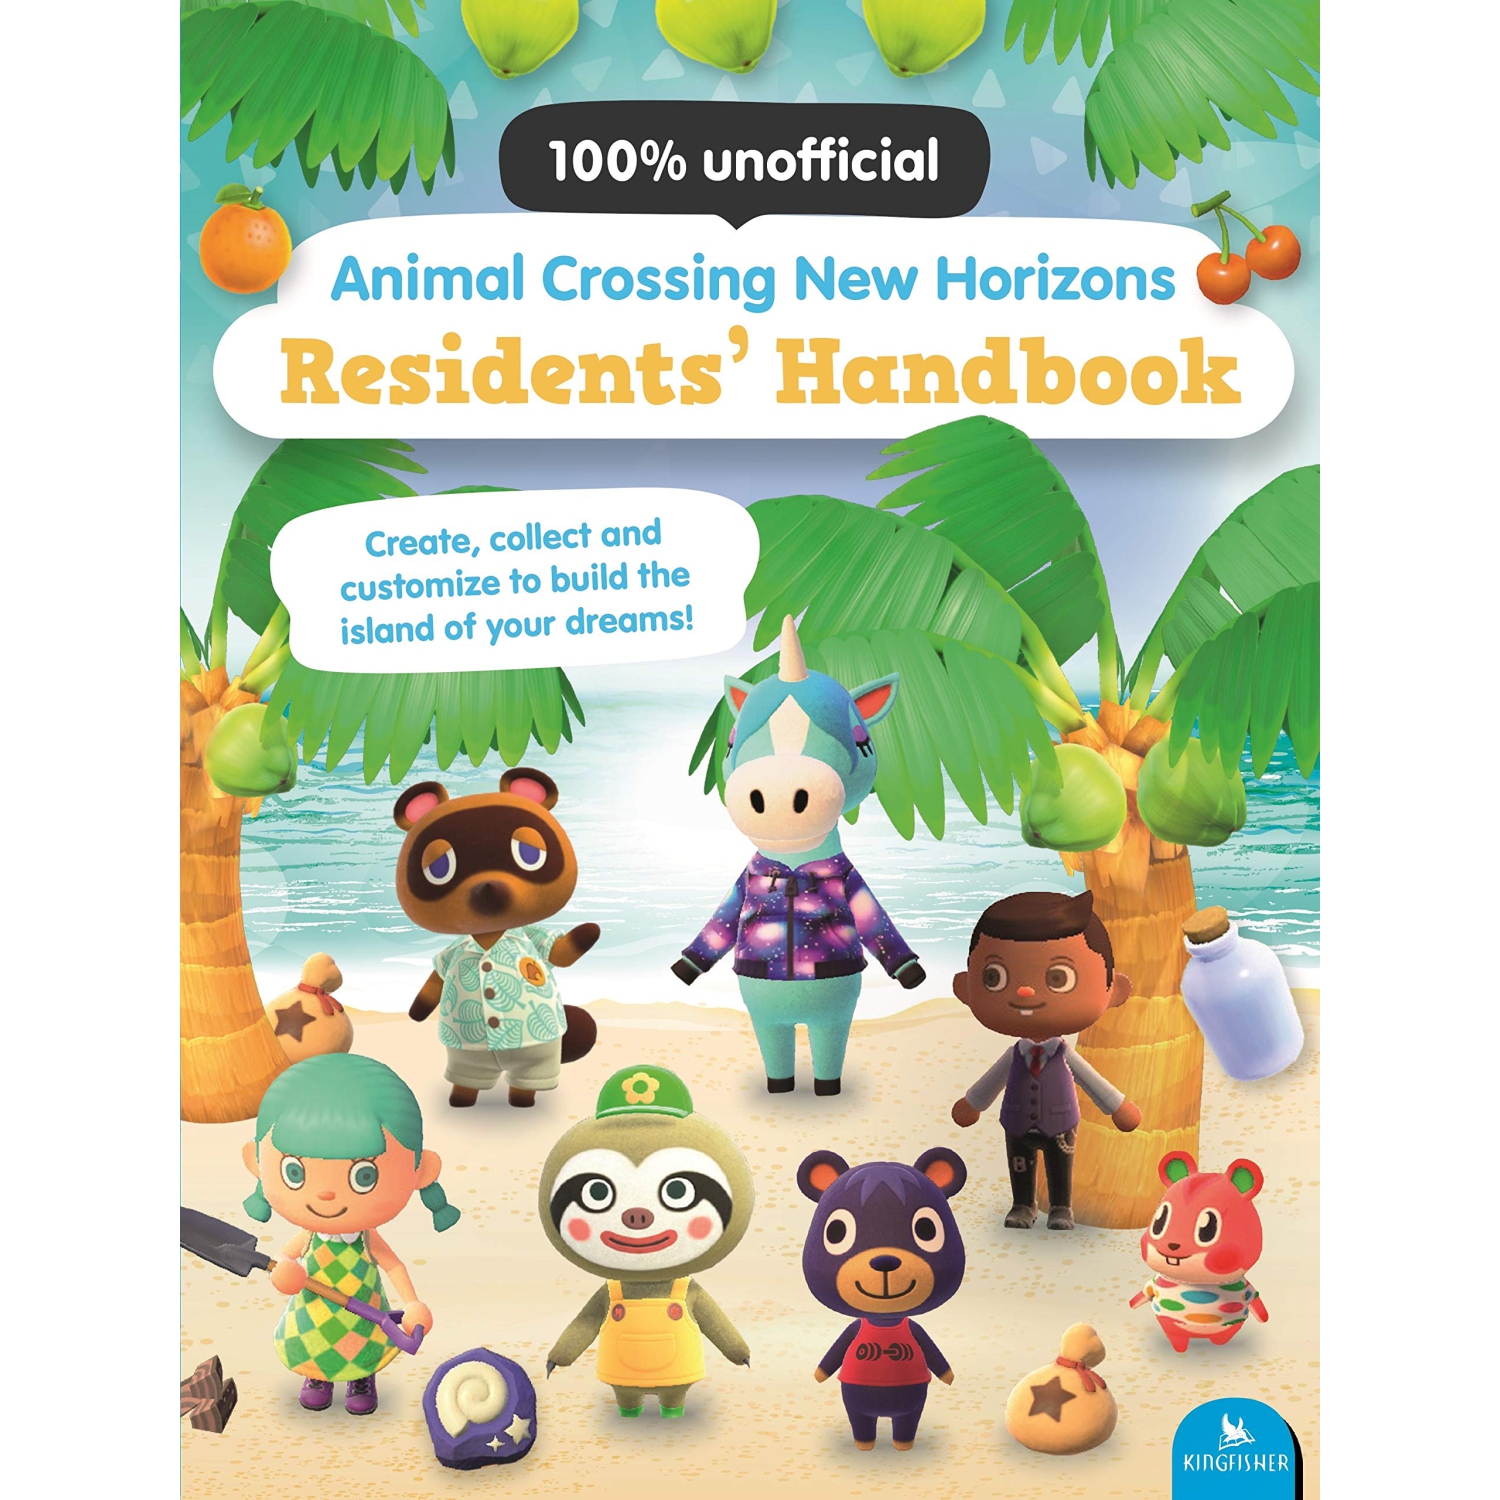 Animal Crossing New Horizons Residents' Handbook The 100% Unofficial Soft Cover Guidebook